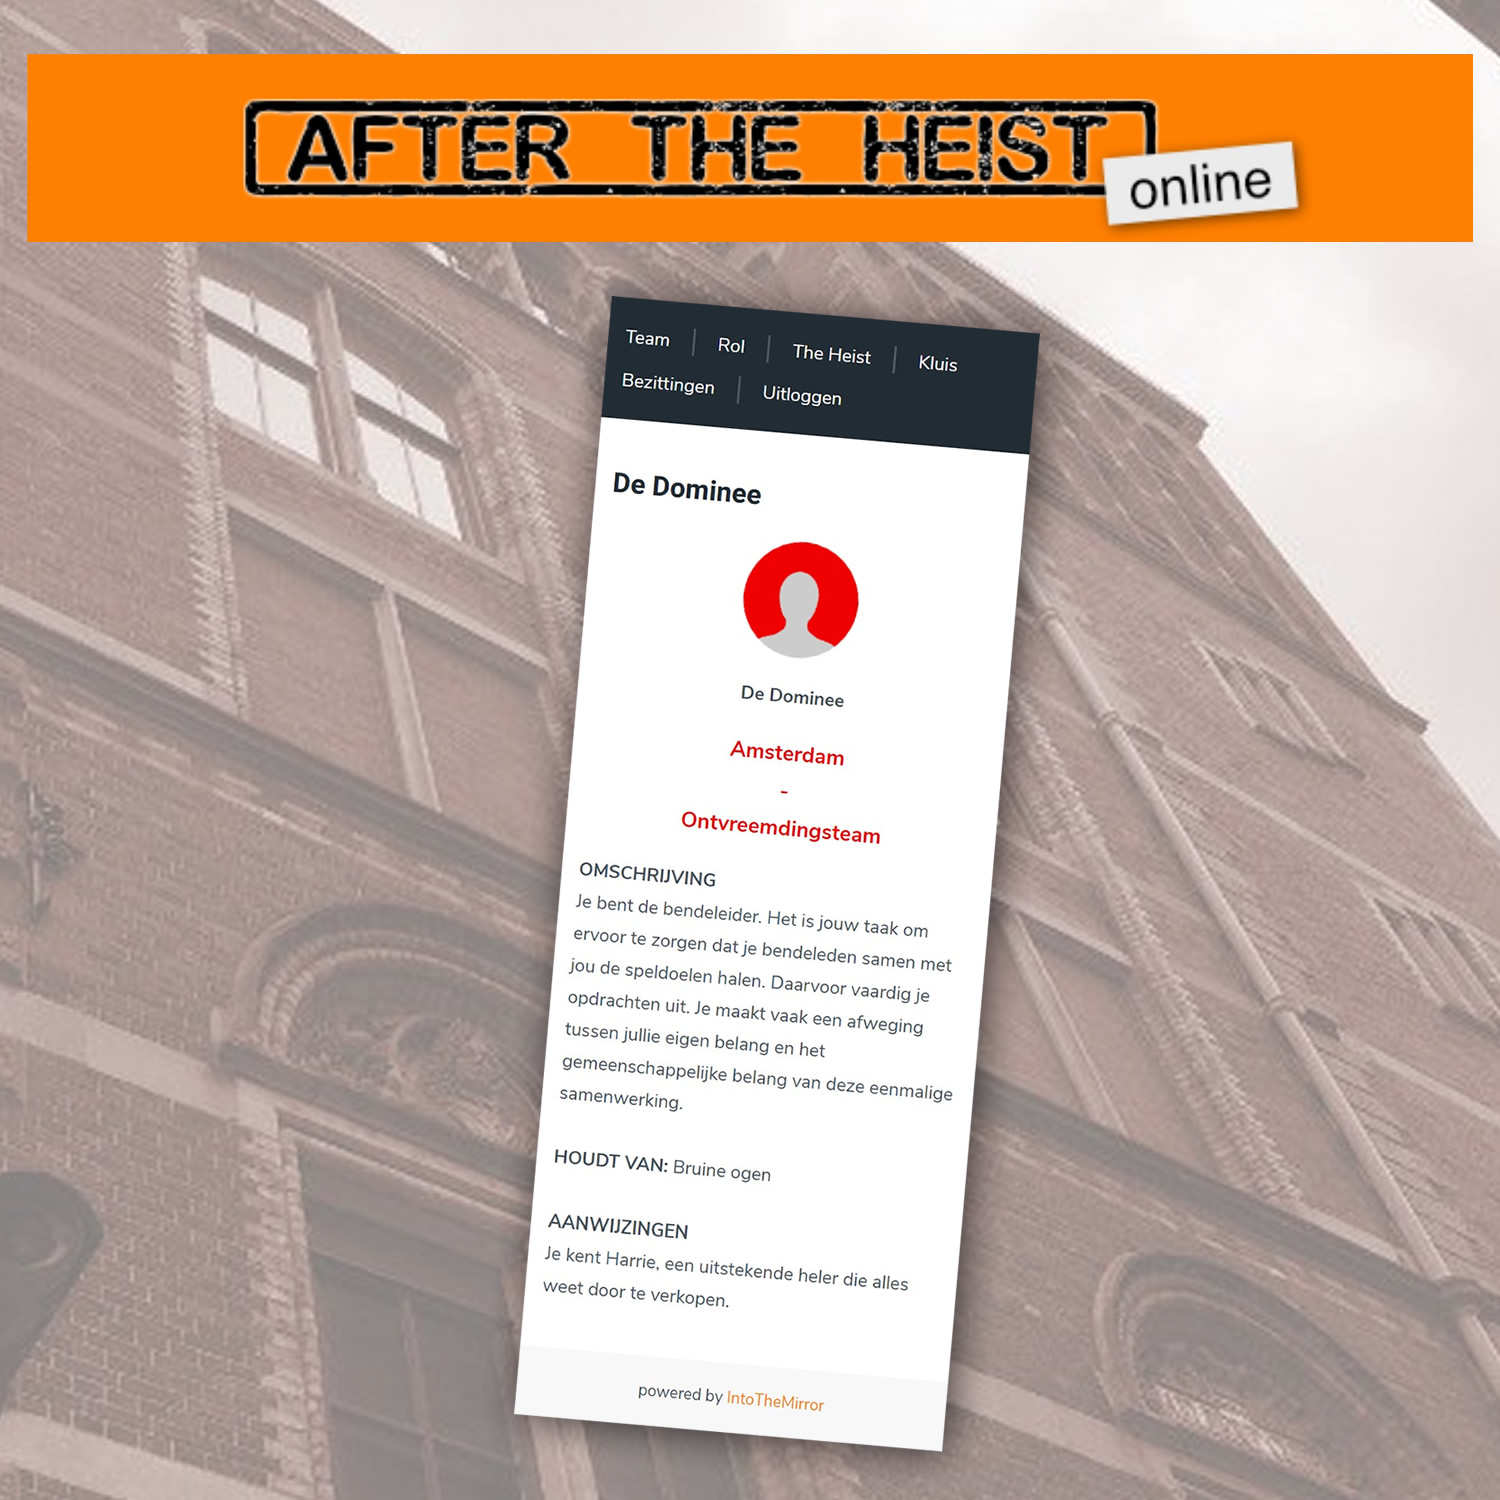 Online real life escape game: After The Heist